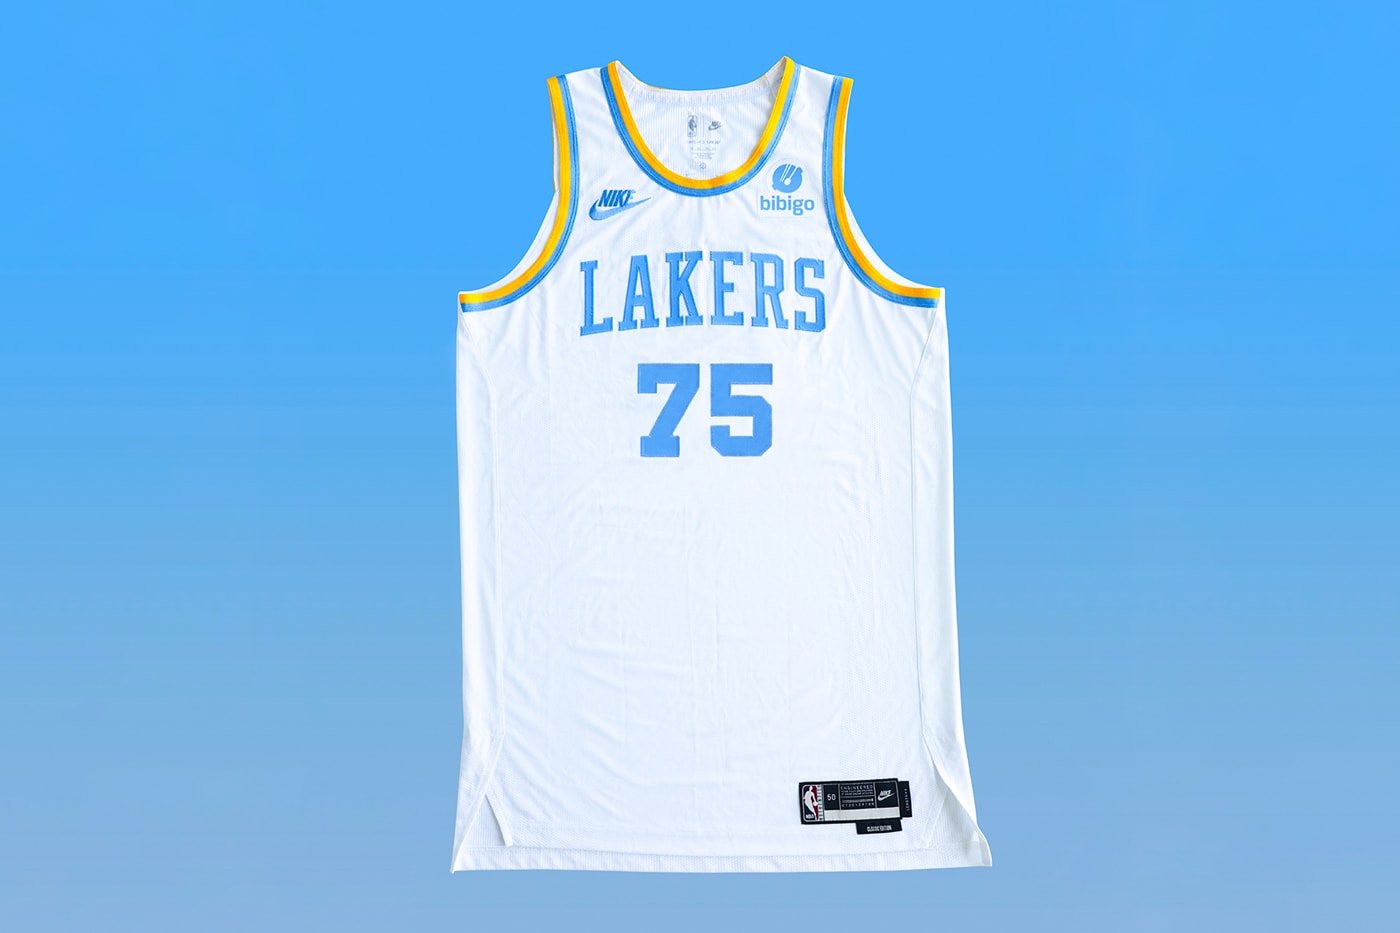 Los Angeles Lakers 75th Anniversary Edition Jerseys reveal